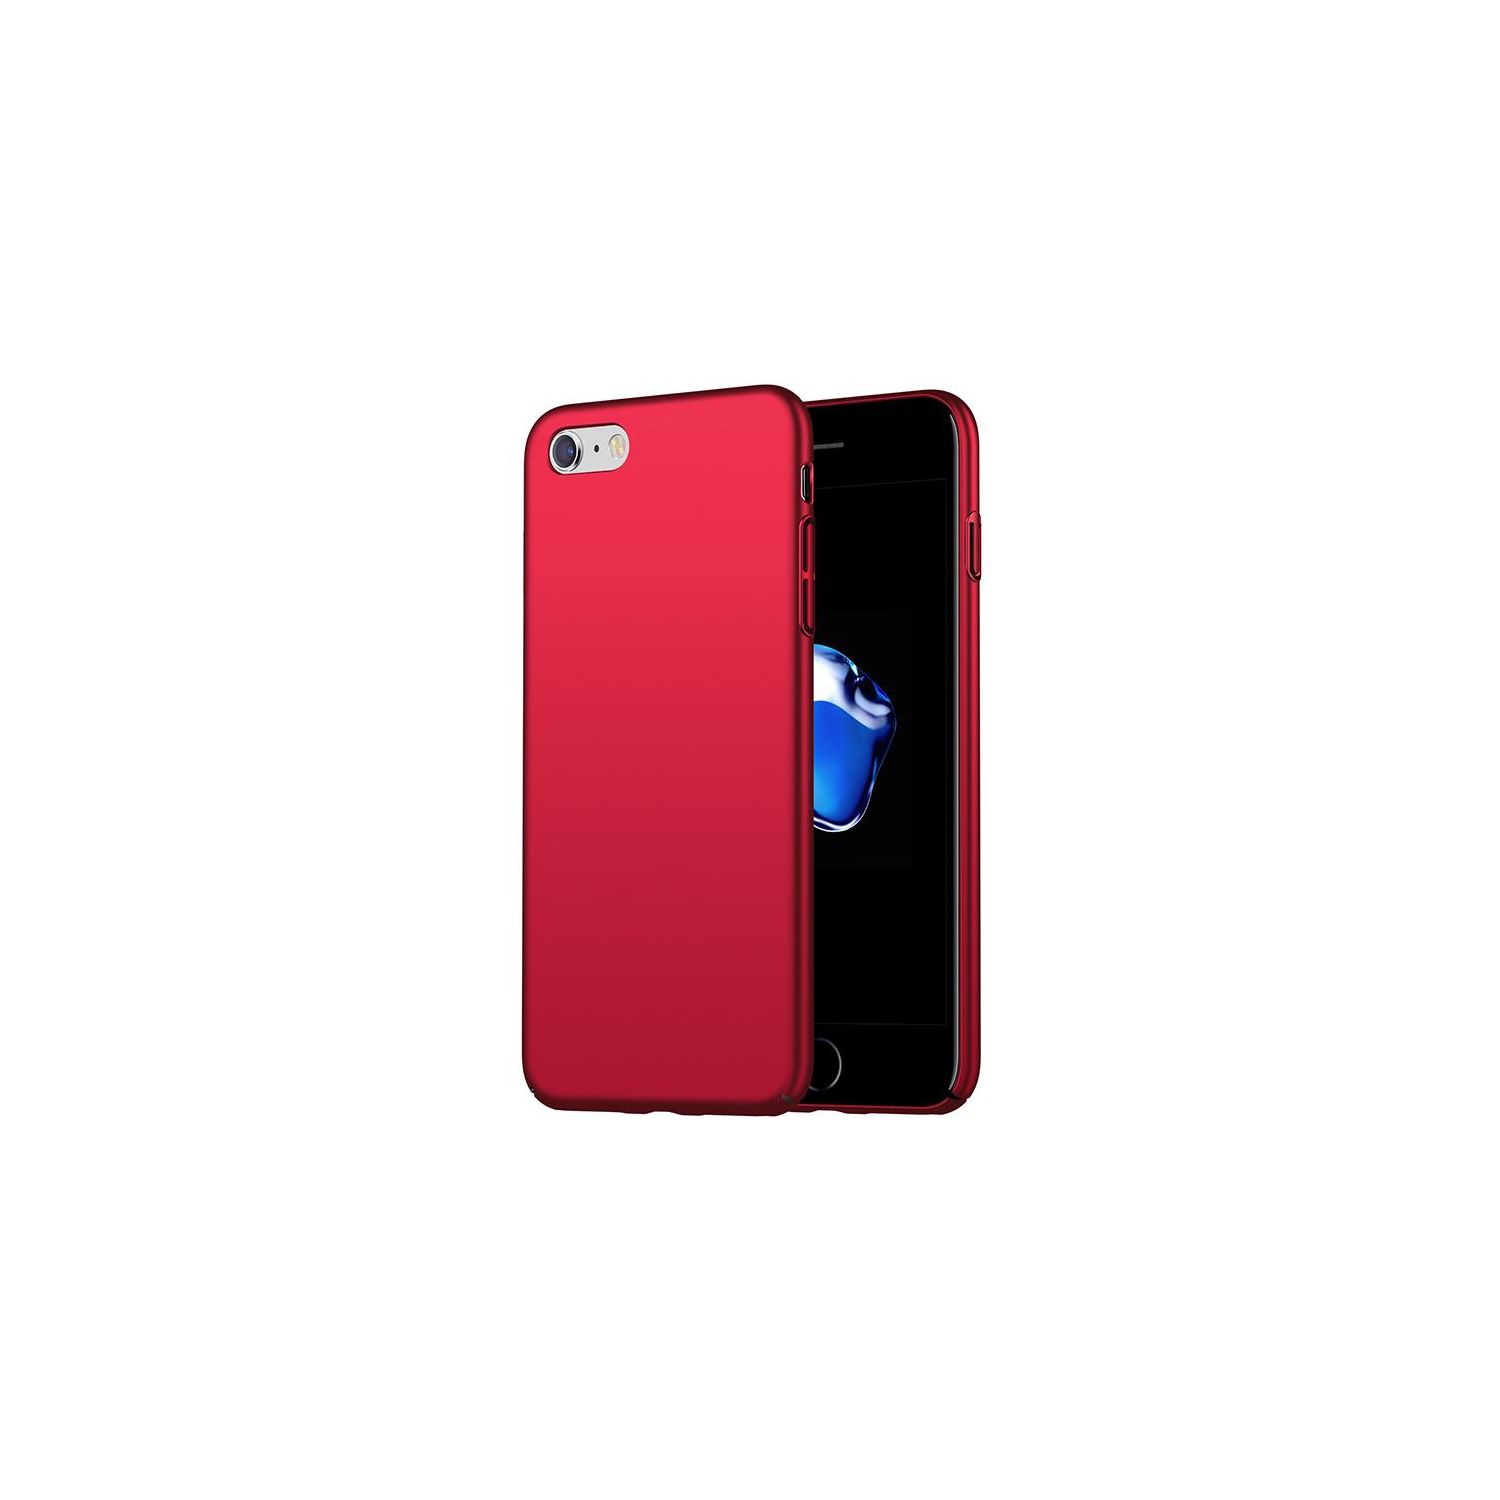 PANDACO Hard Shell Metallic Red Case for iPhone 7 or iPhone 8 or iPhone SE (2020/2022)